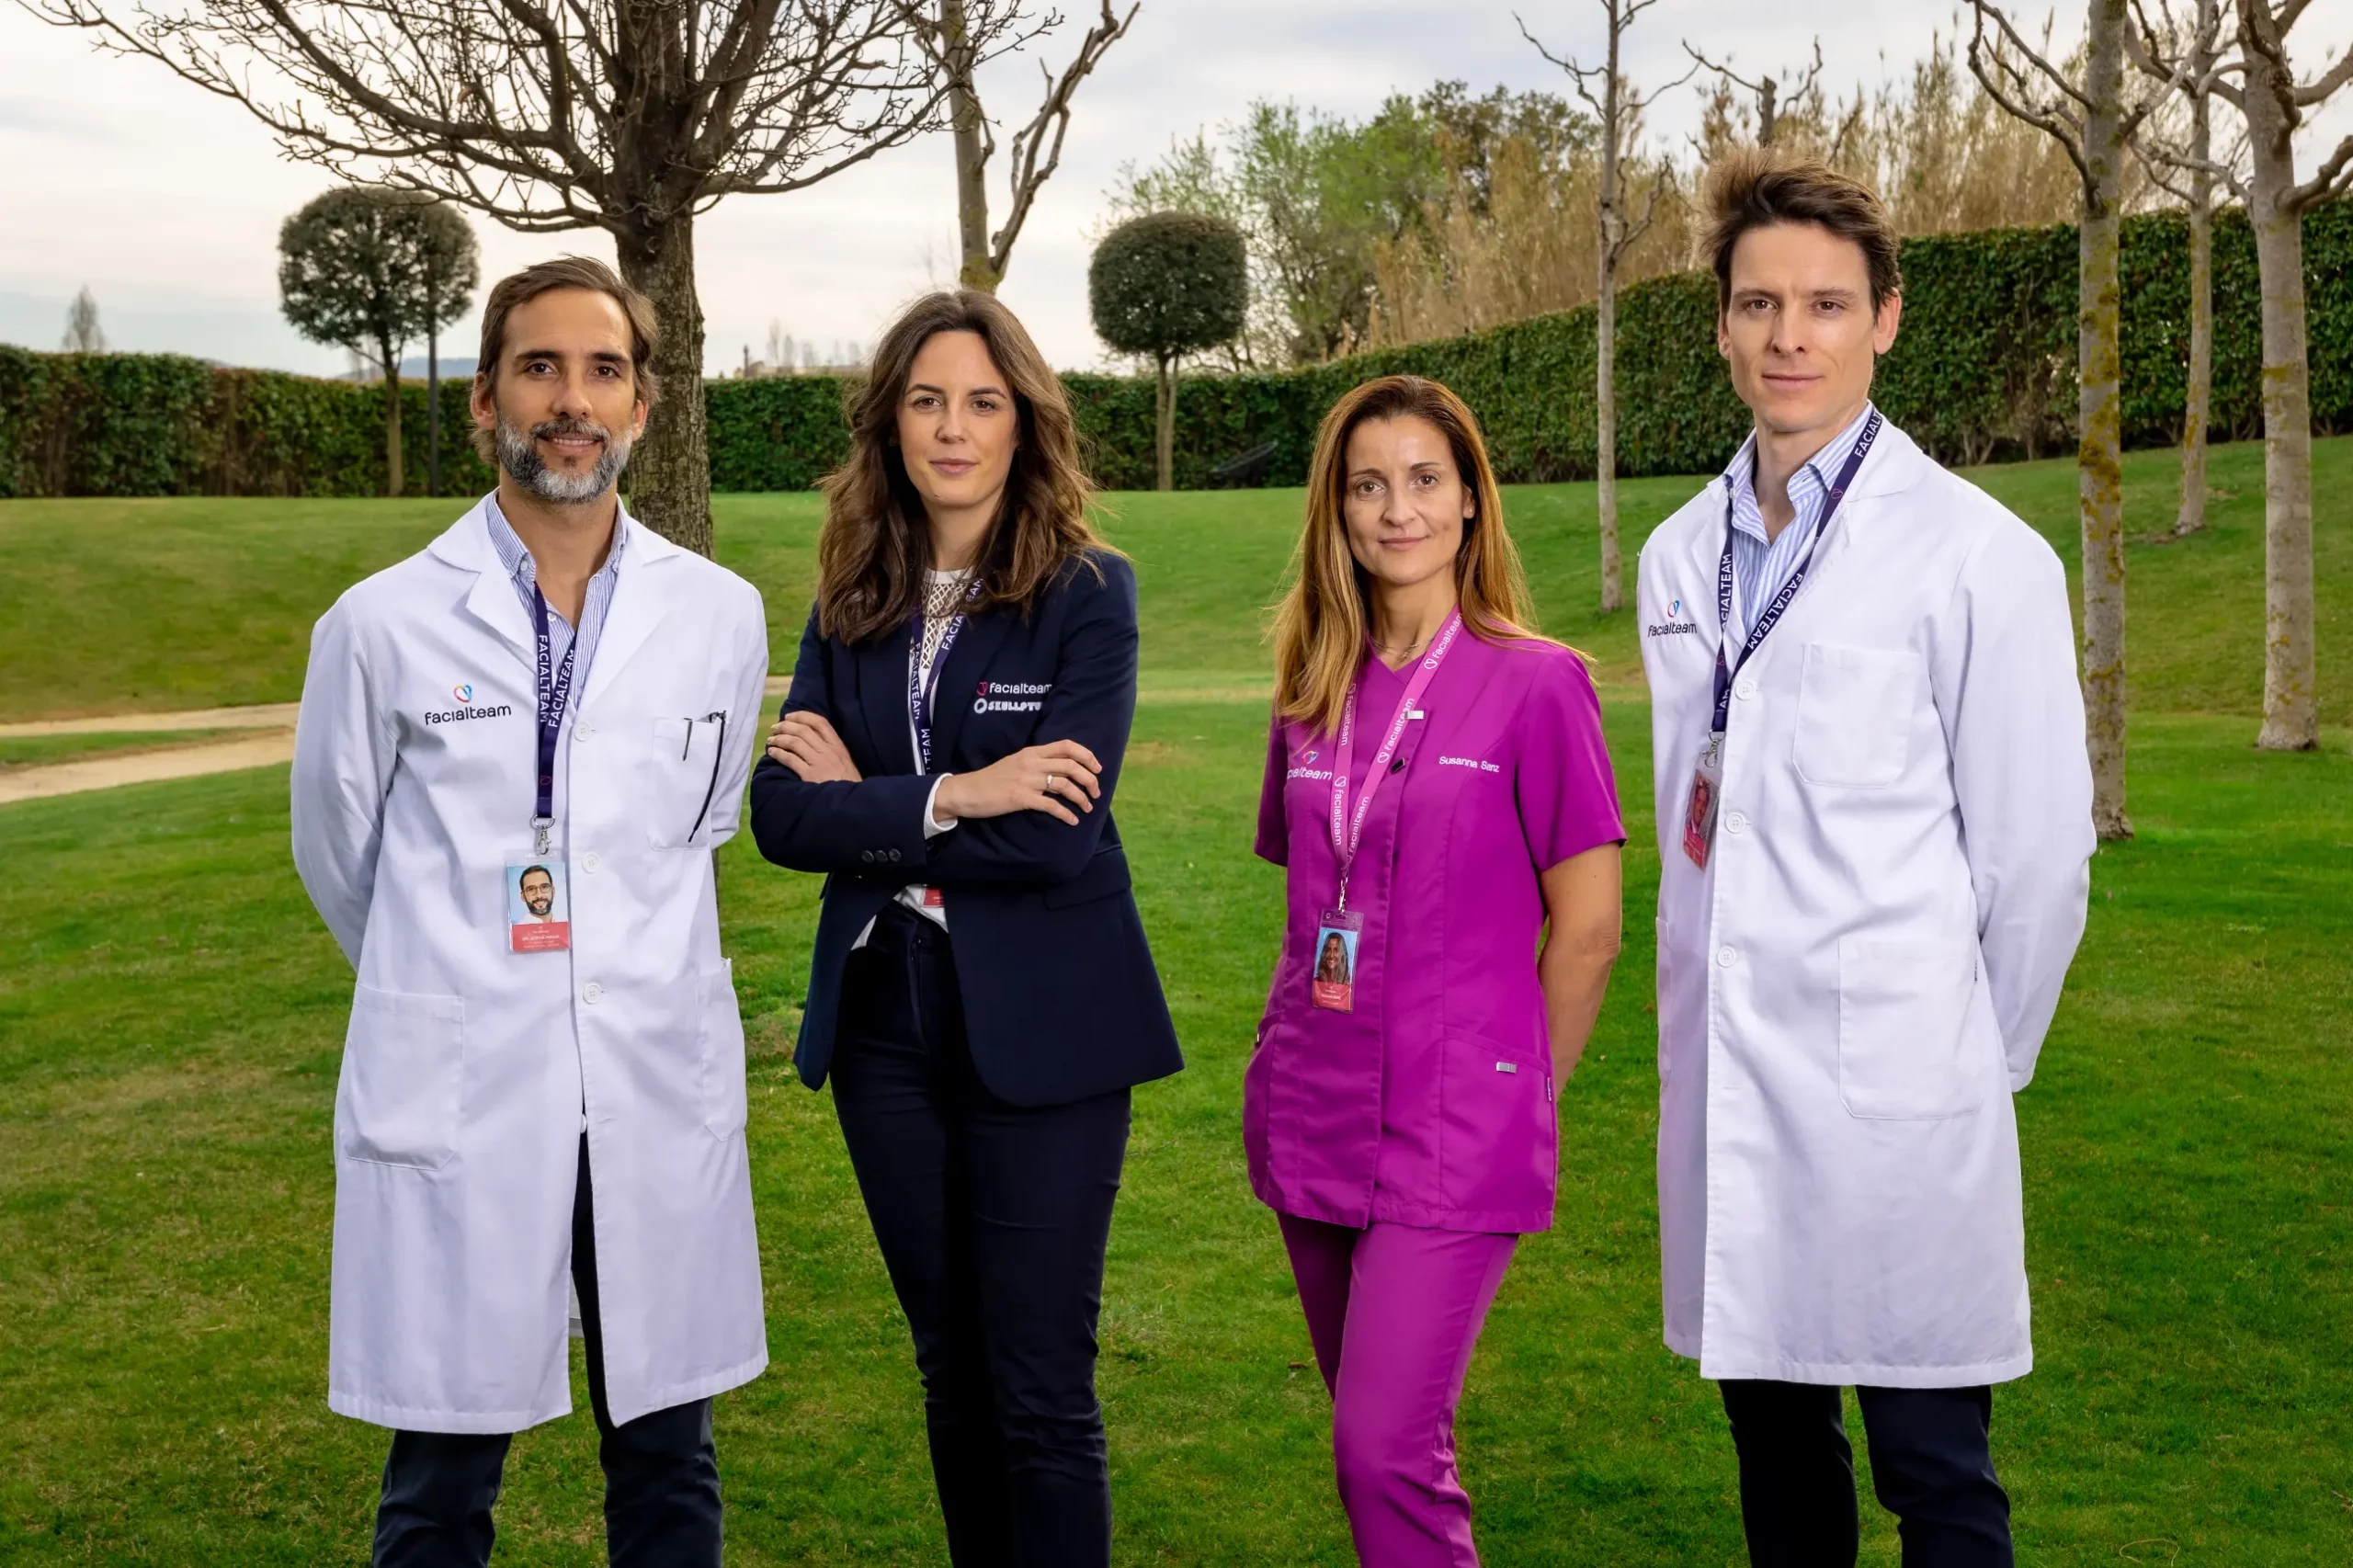 The medical staff of Facialteam Barcelona in the gardens of the clinic of Facialteam in Barcelona